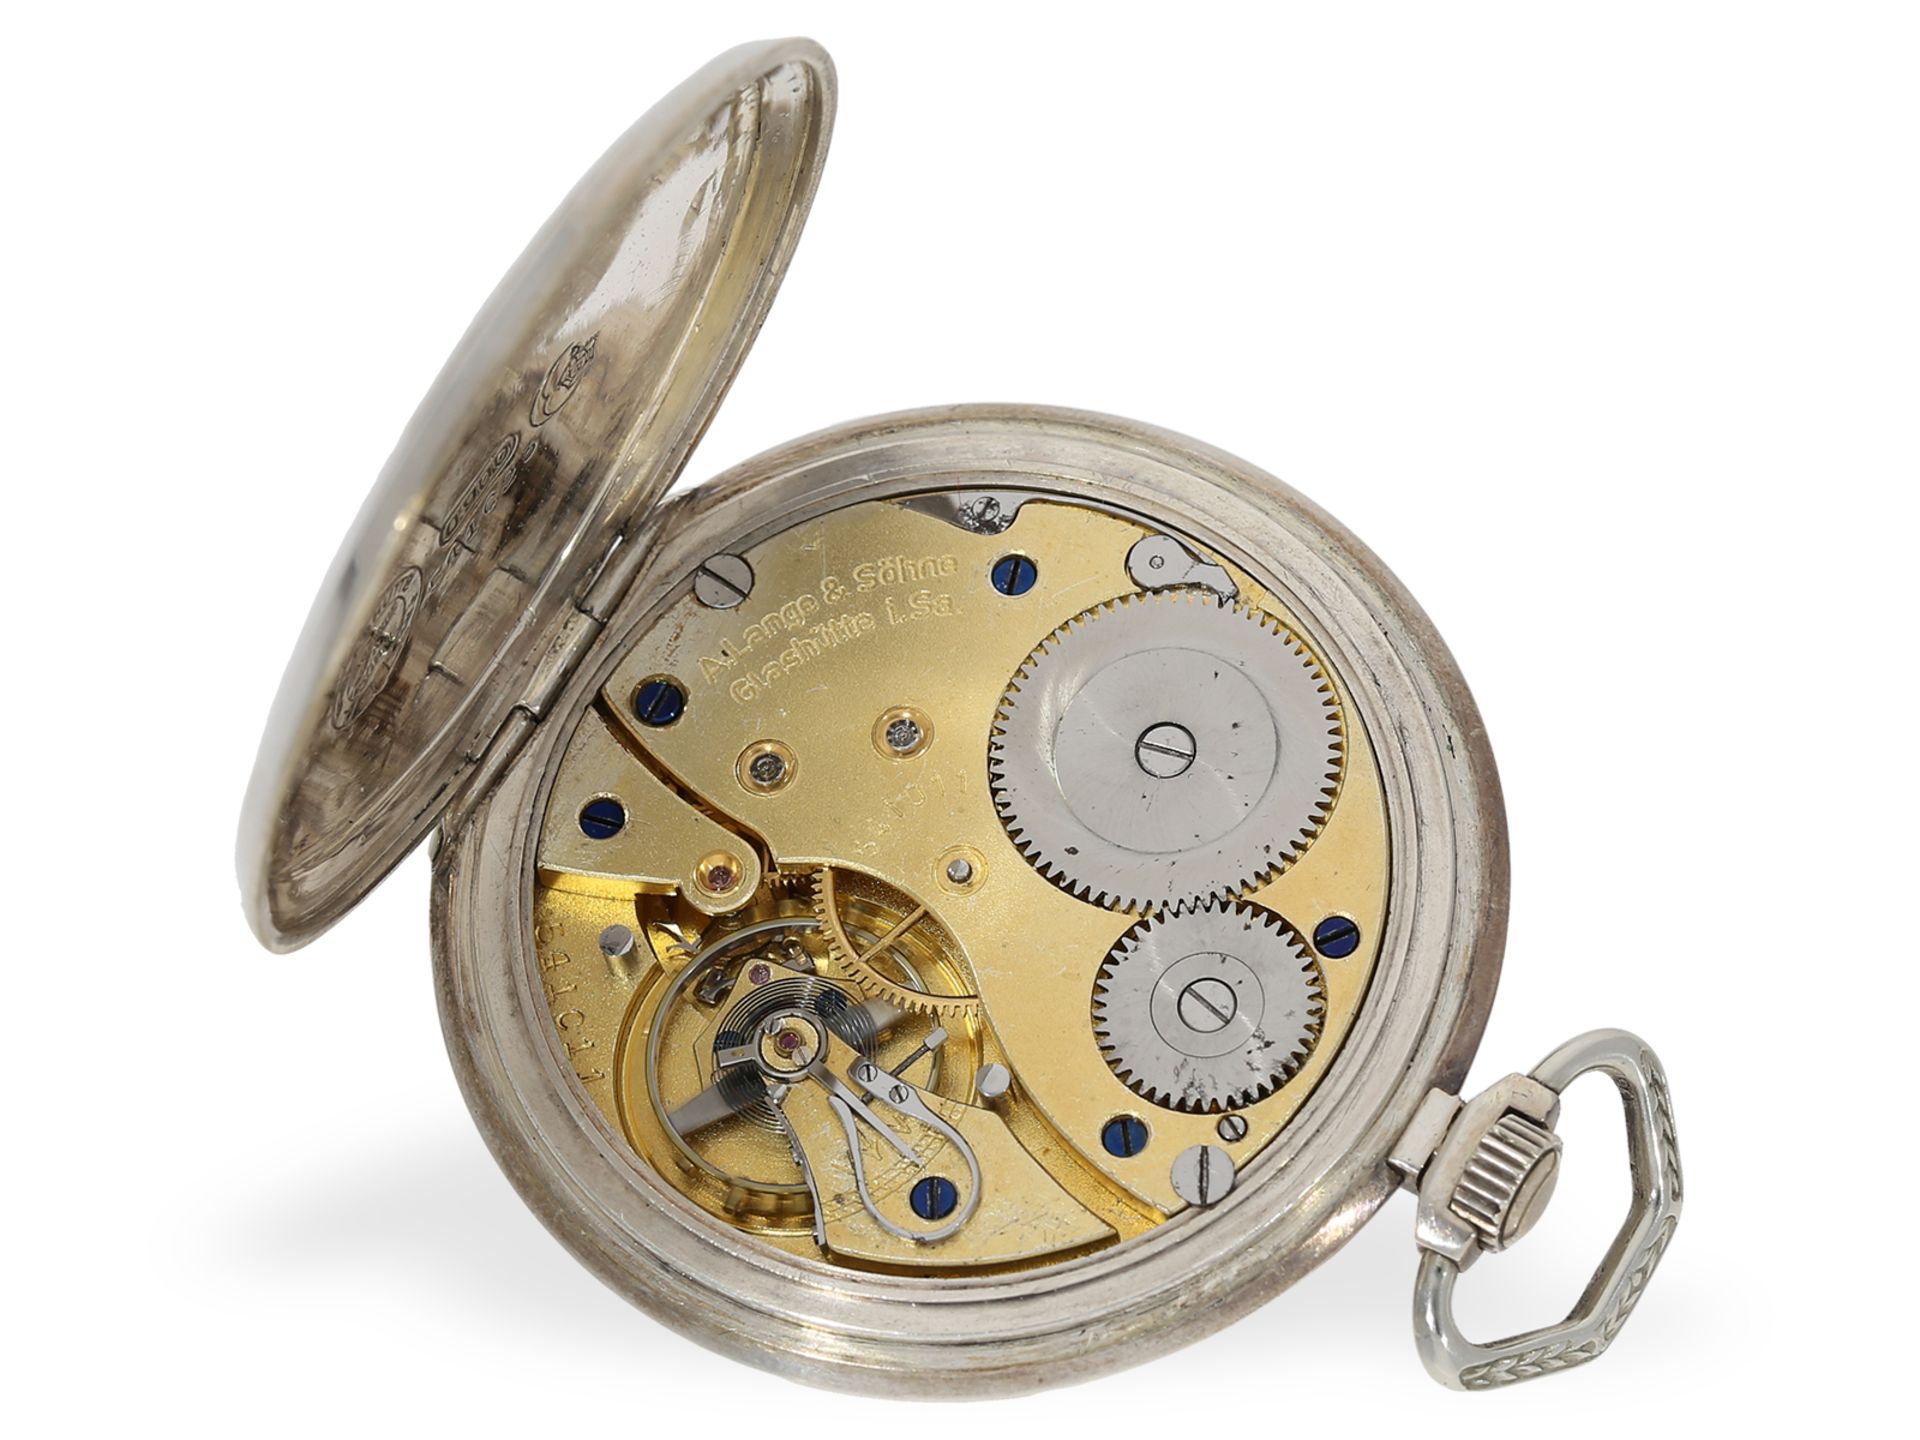 Pocket watch: A. Lange & Söhne Glashütte dress watch with original box and papers - Image 2 of 6